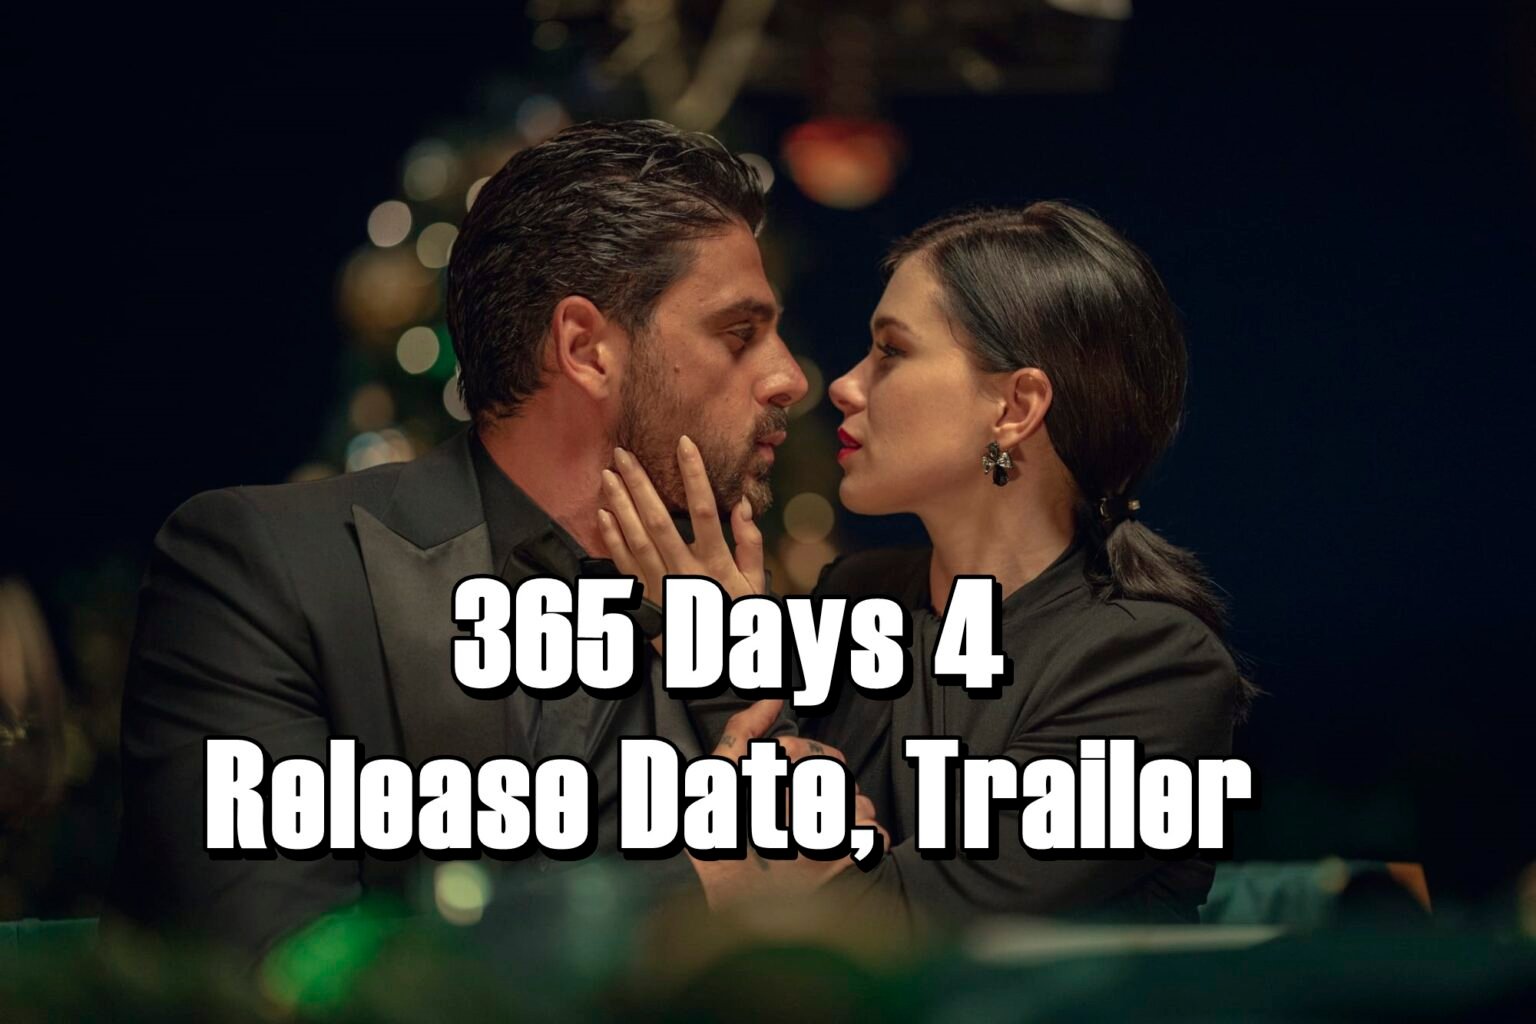 365 Days 4 Release Date, Trailer Is it canceled?